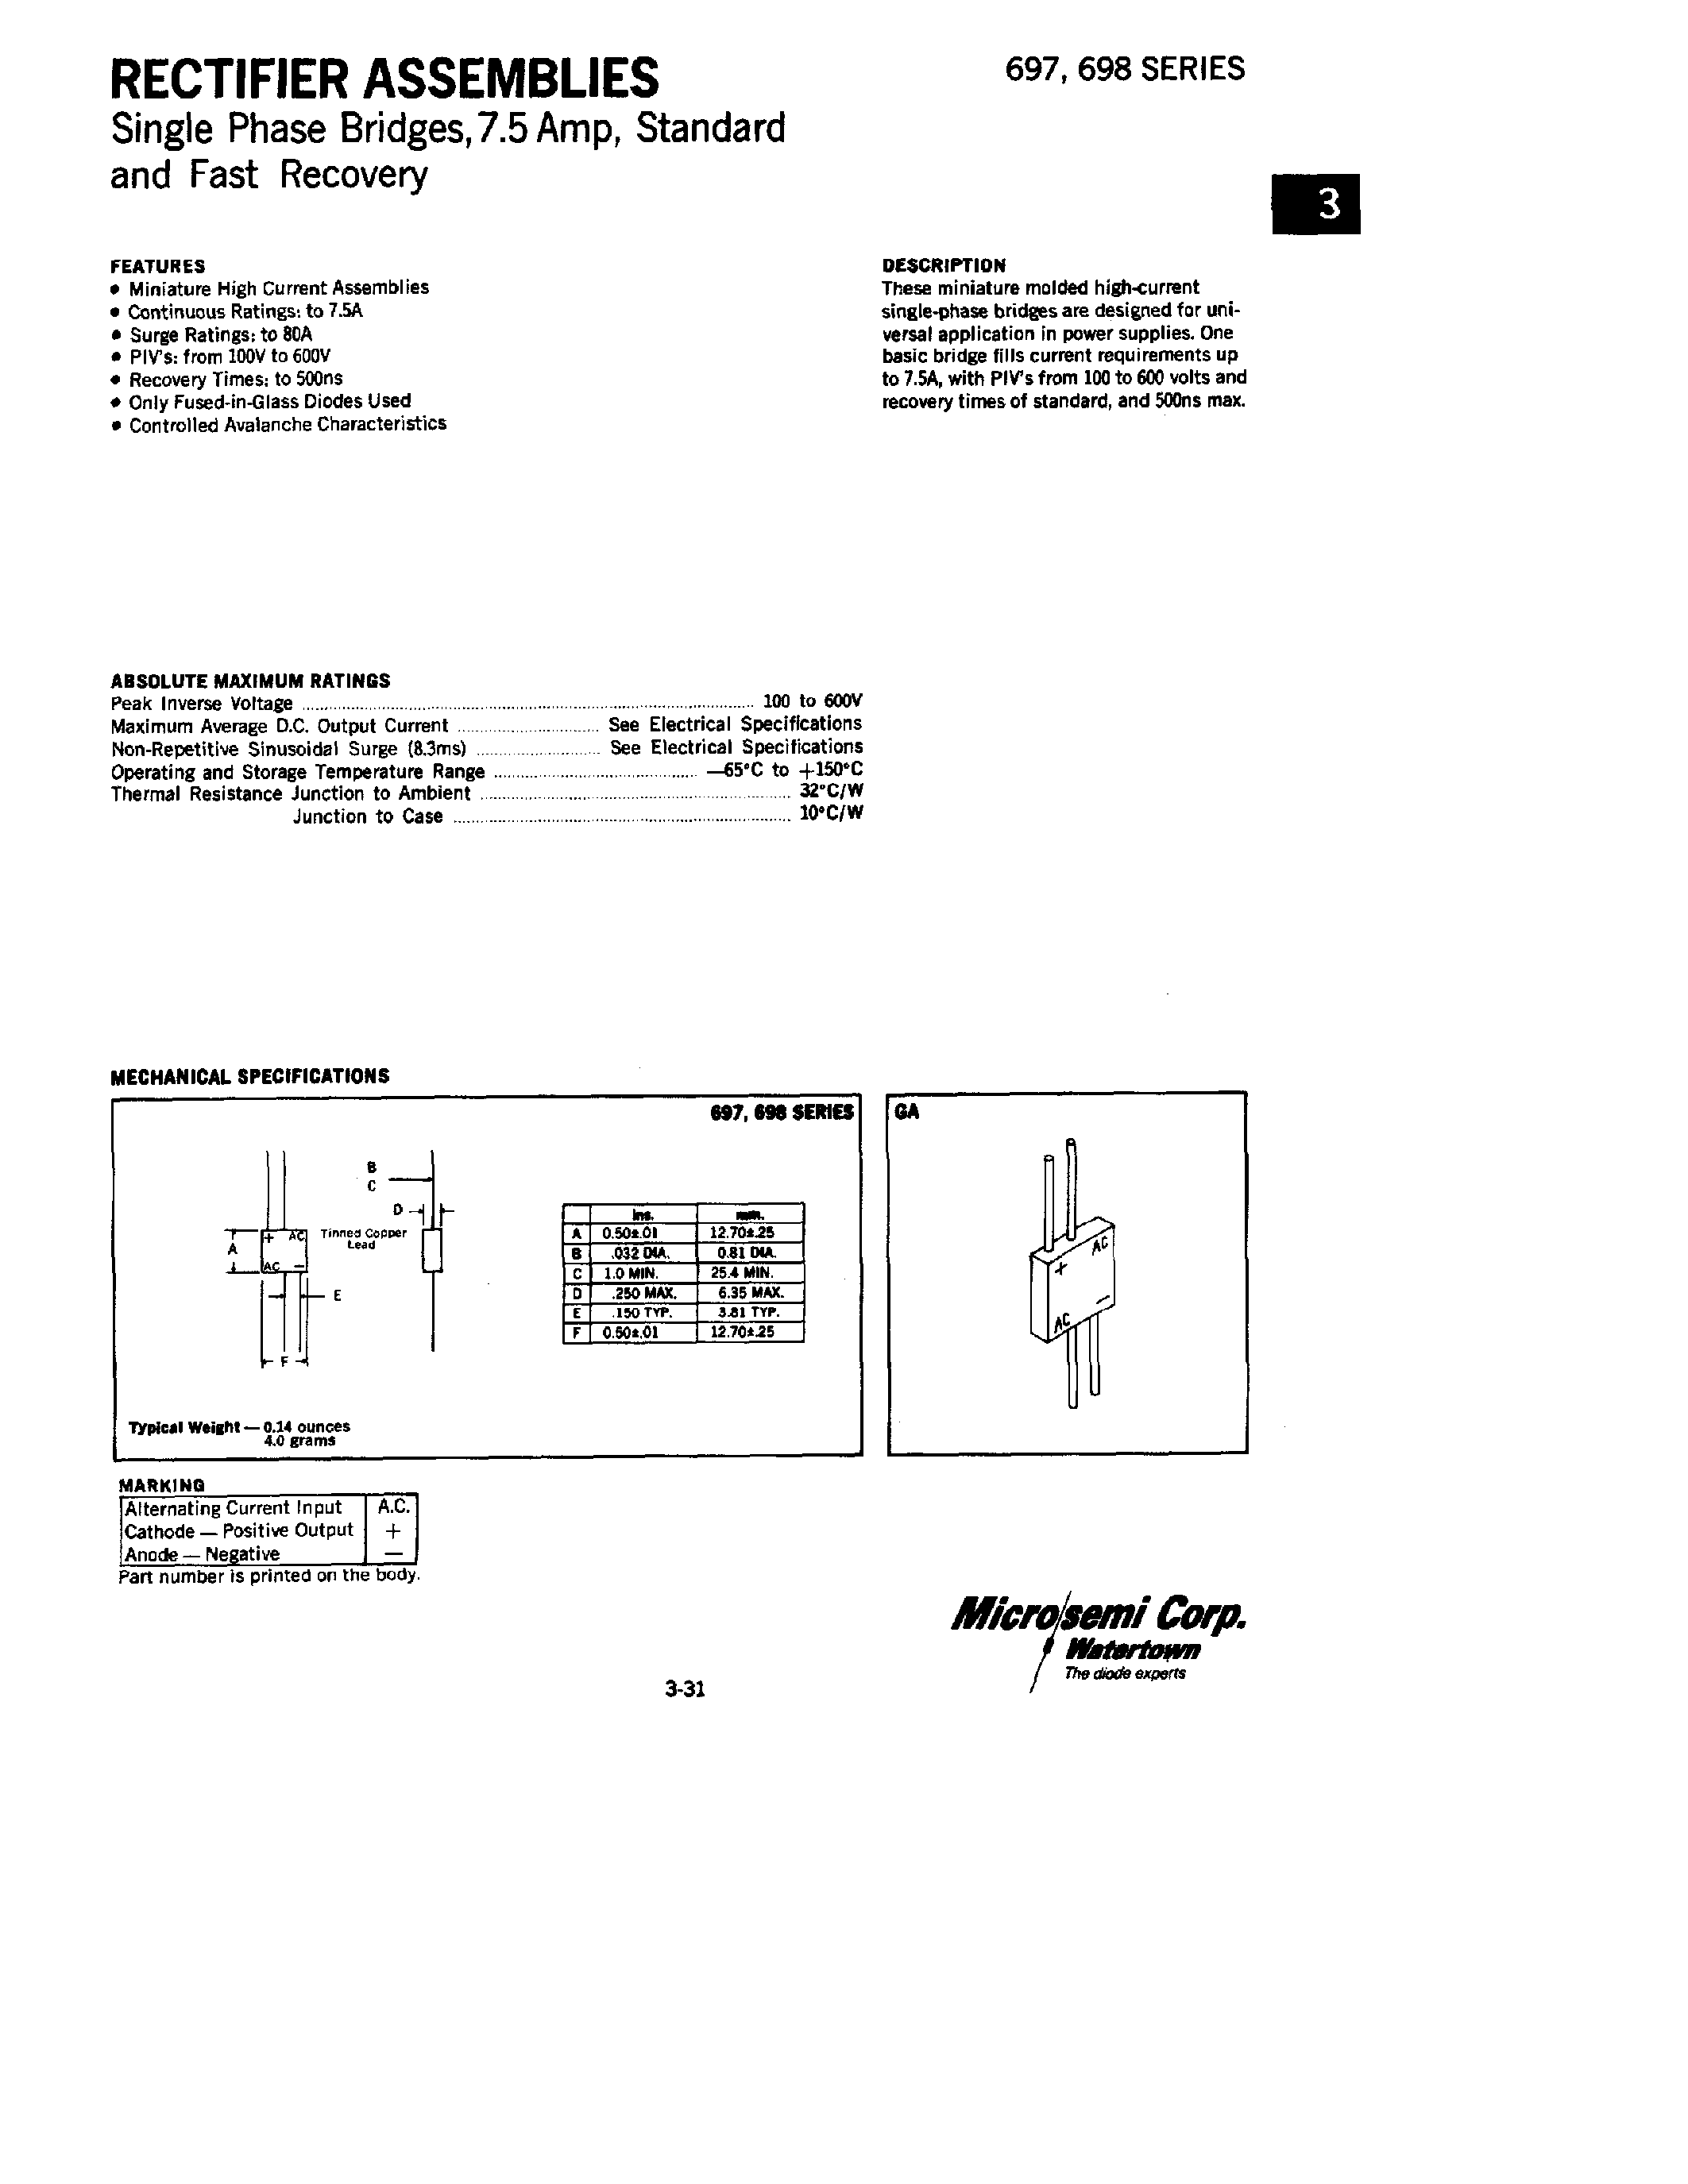 Datasheet 697-6 - RECTIFIERS ASSEMBLIES SINGLE PHASE BRIDGES/ 7.5 AMP/ STANDARD AND FAST RECOVERY page 1